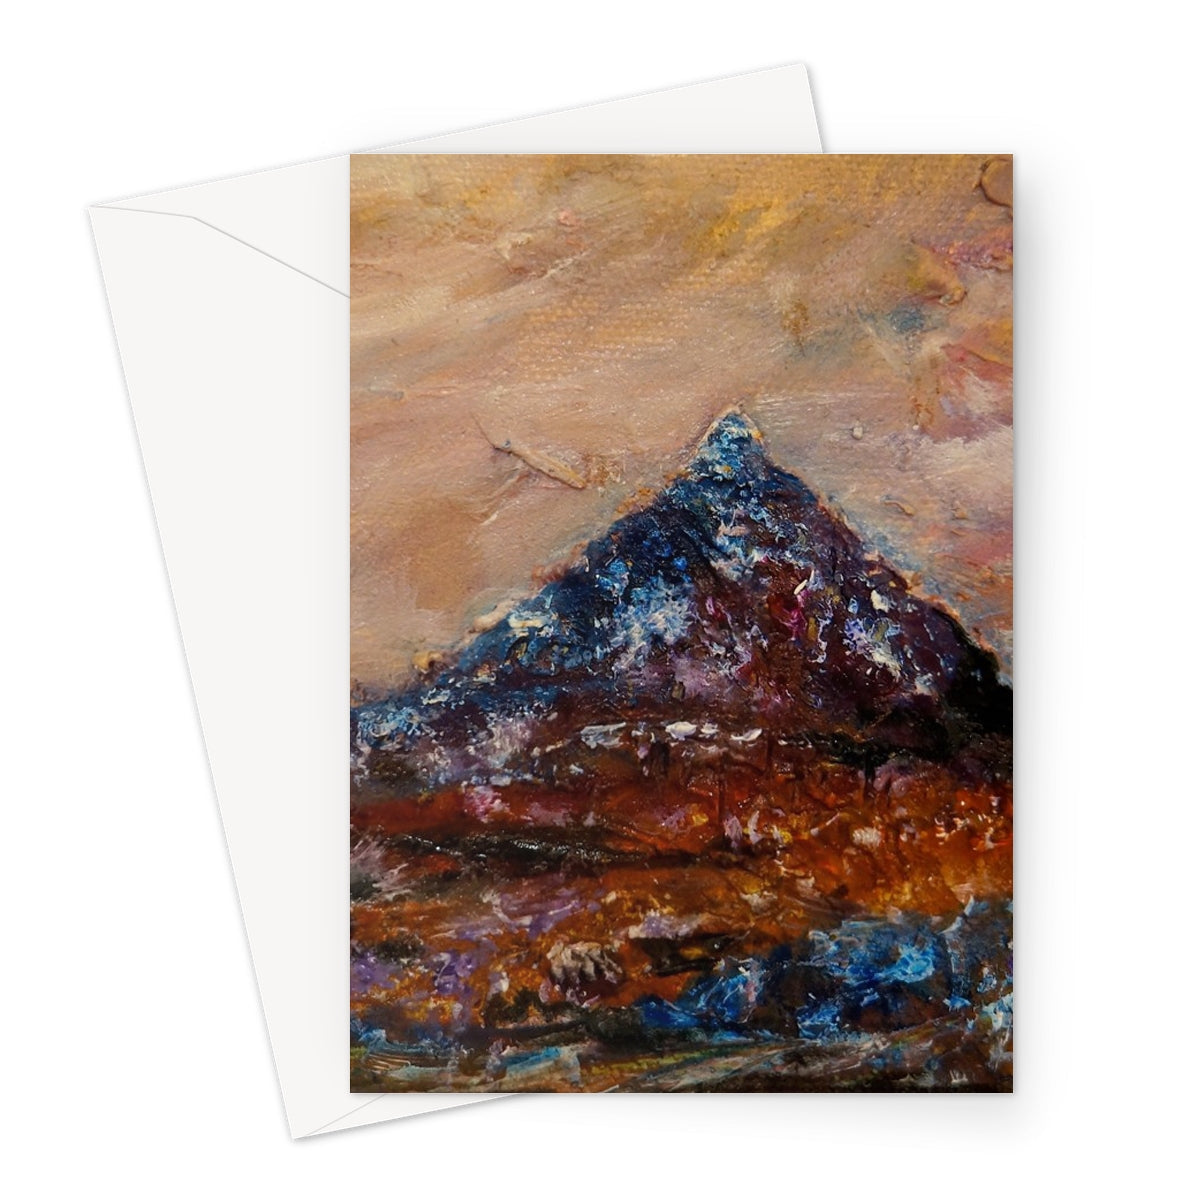 Buachaille Etive Mòr Art Gifts Greeting Card-Greetings Cards-Glencoe Art Gallery-A5 Portrait-1 Card-Paintings, Prints, Homeware, Art Gifts From Scotland By Scottish Artist Kevin Hunter